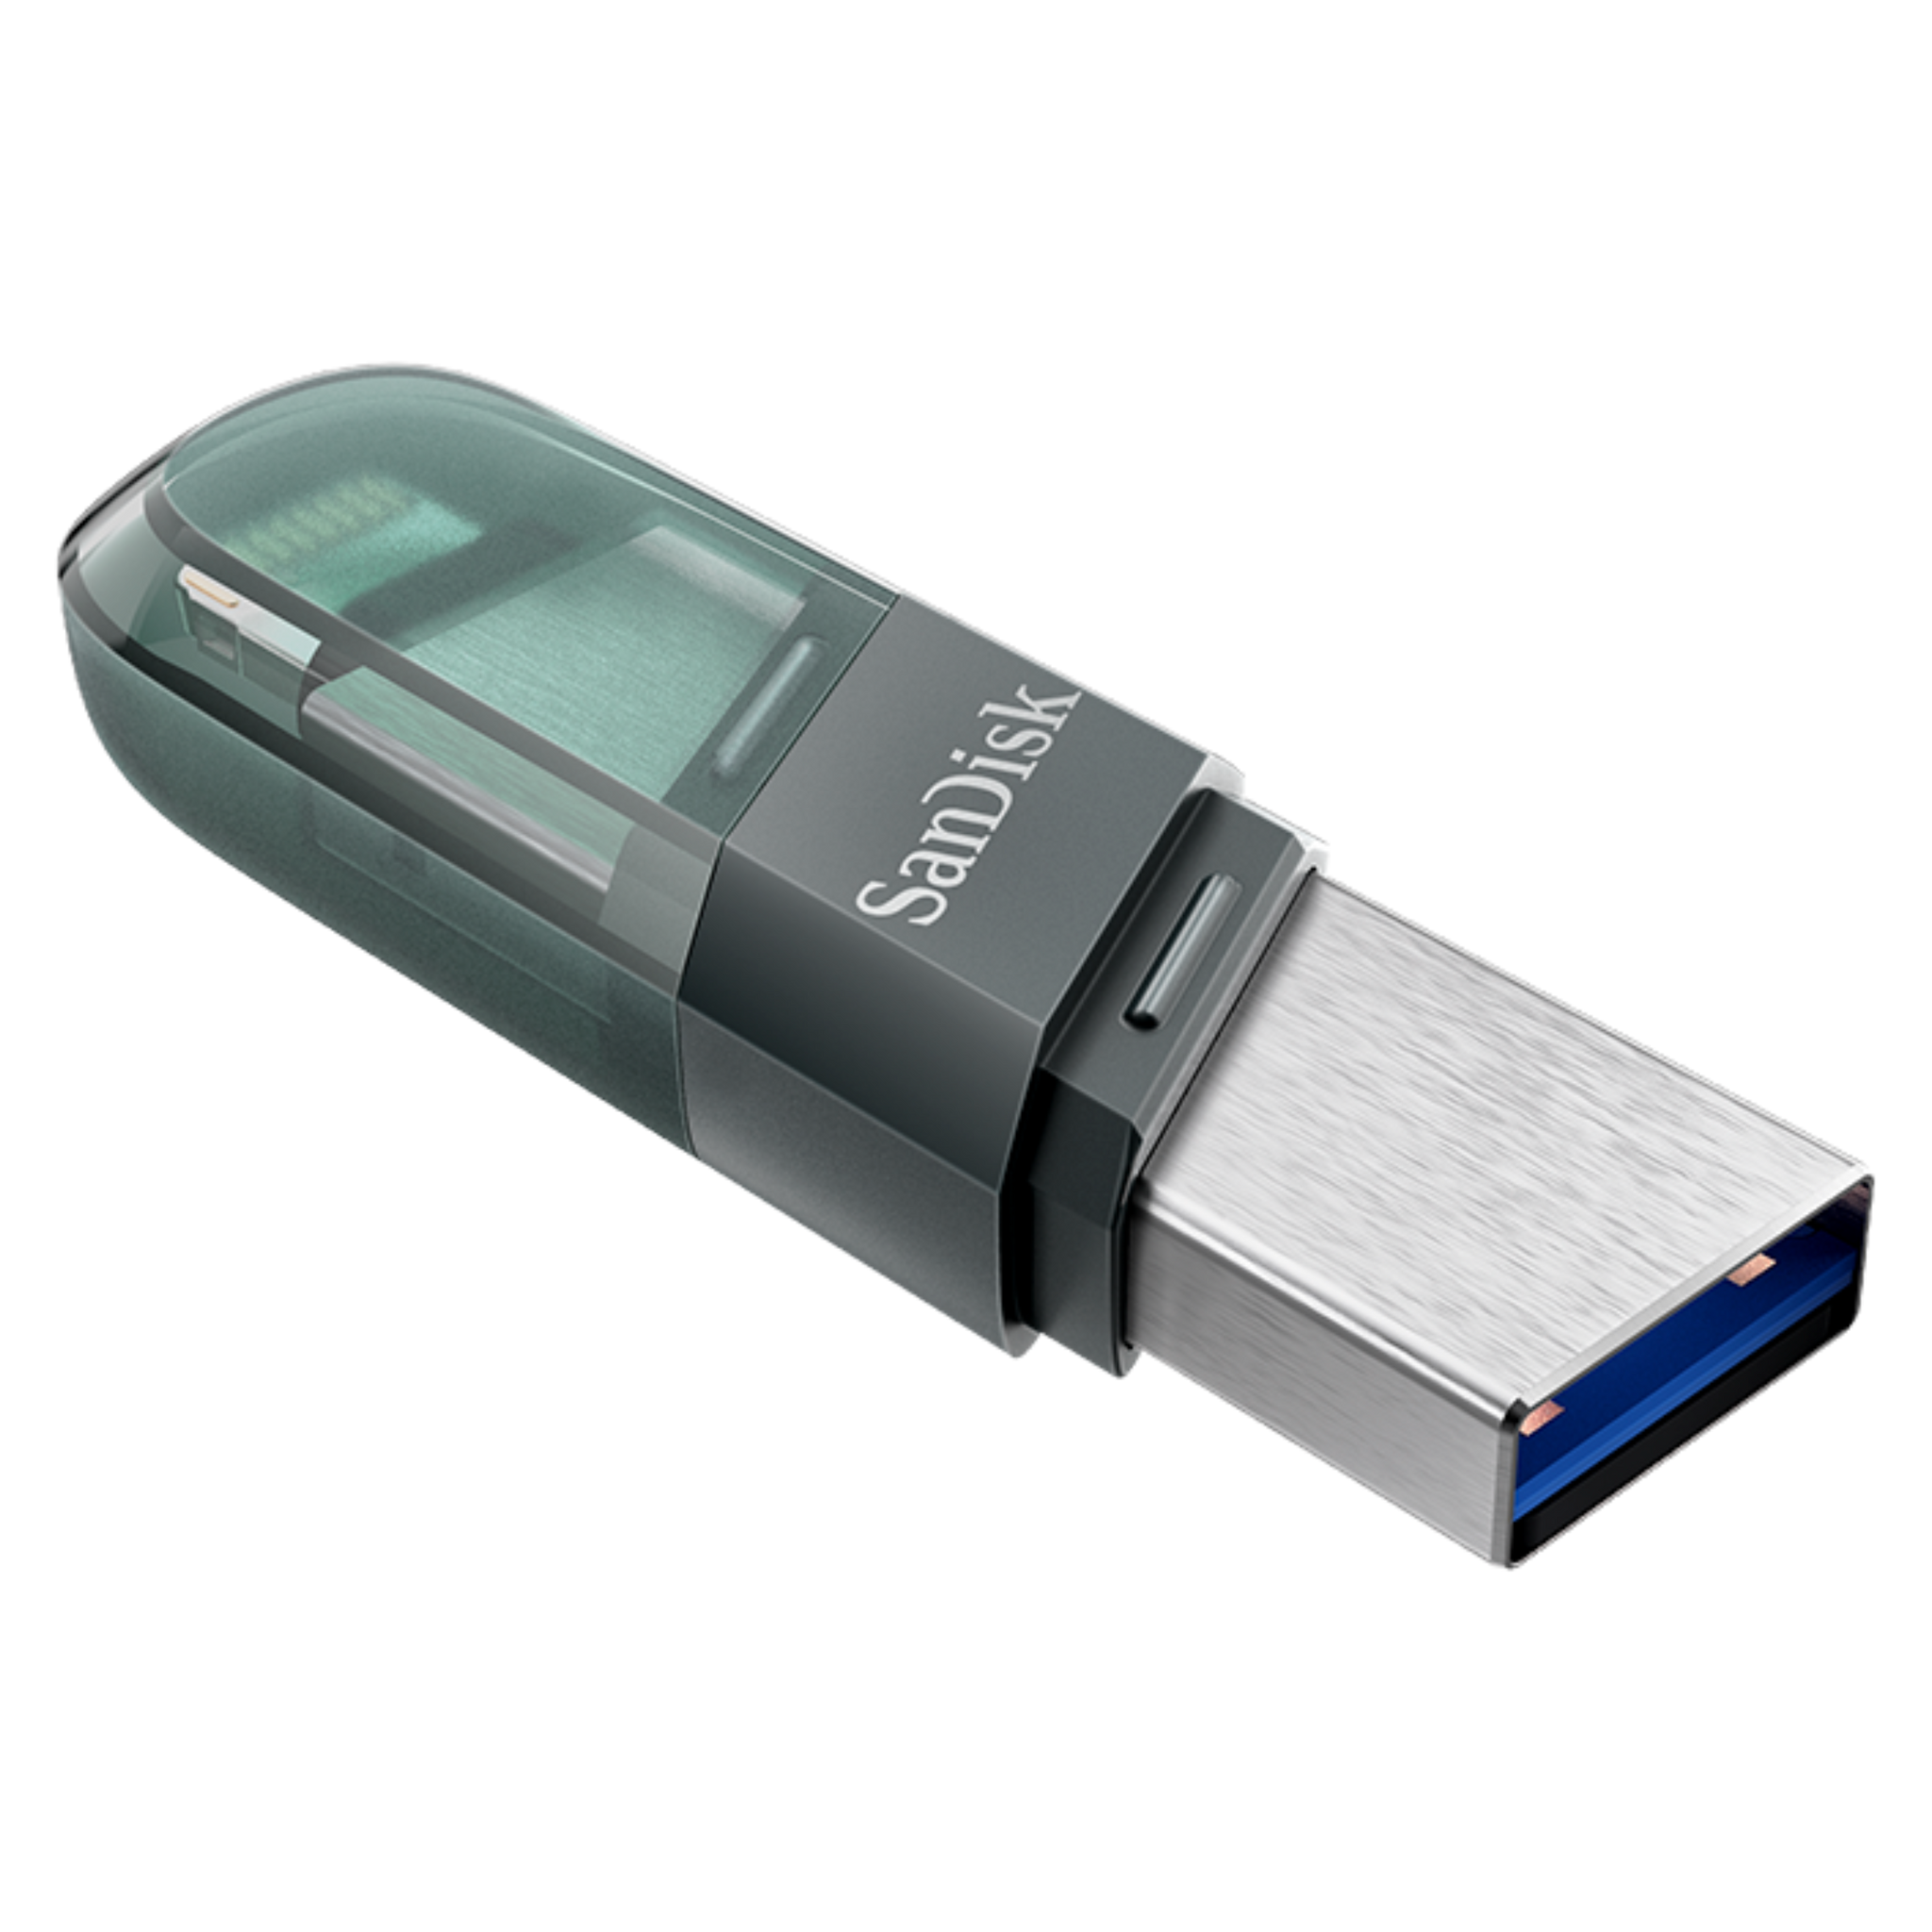 Lightning Flash Drive for iPhones and iPads by Sharper Image @